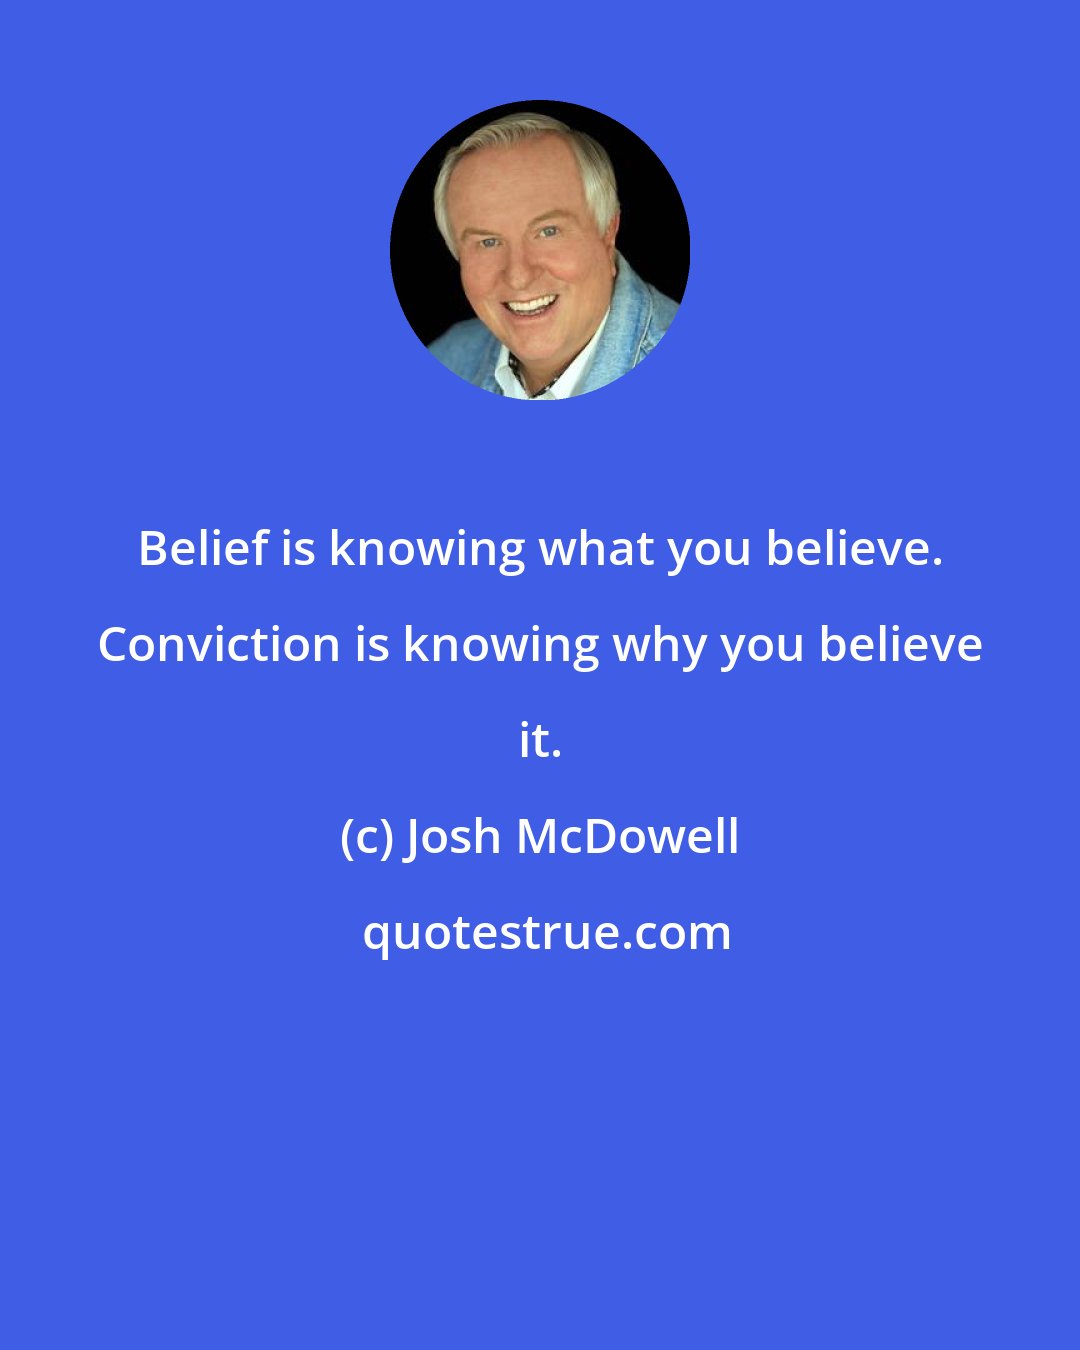 Josh McDowell: Belief is knowing what you believe. Conviction is knowing why you believe it.